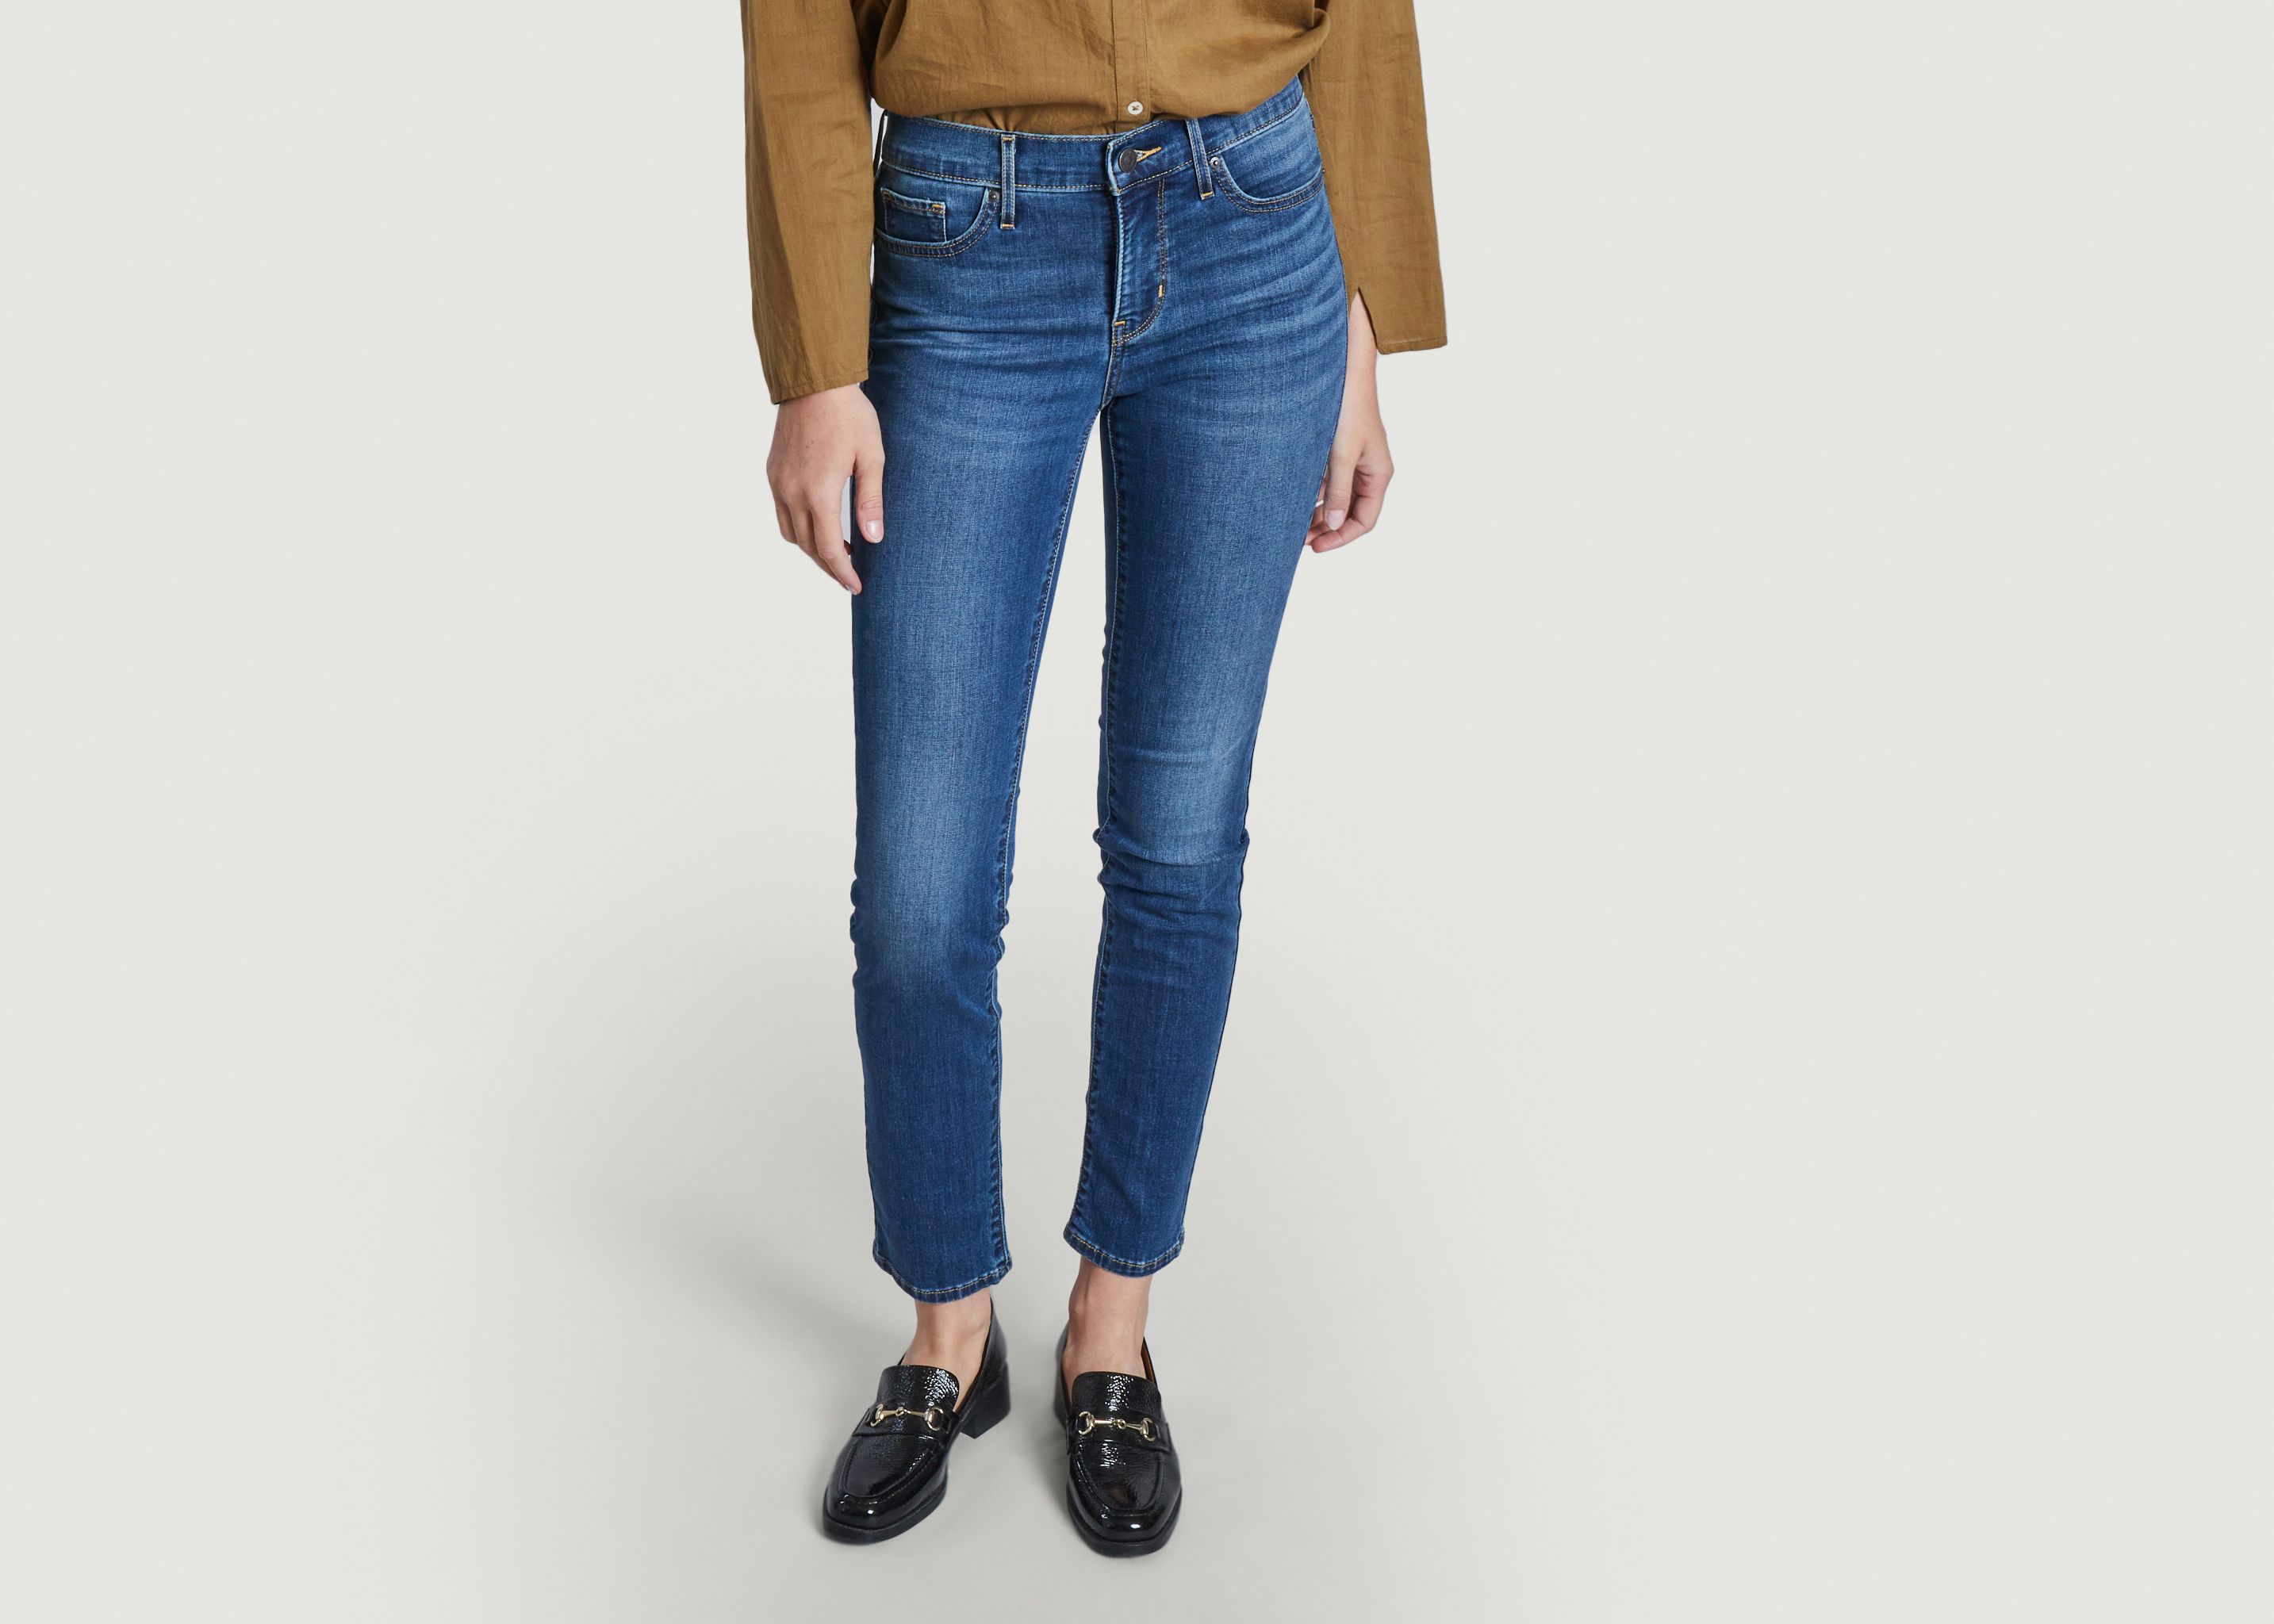 312 Shaping slim jeans  - Levi's Red Tab